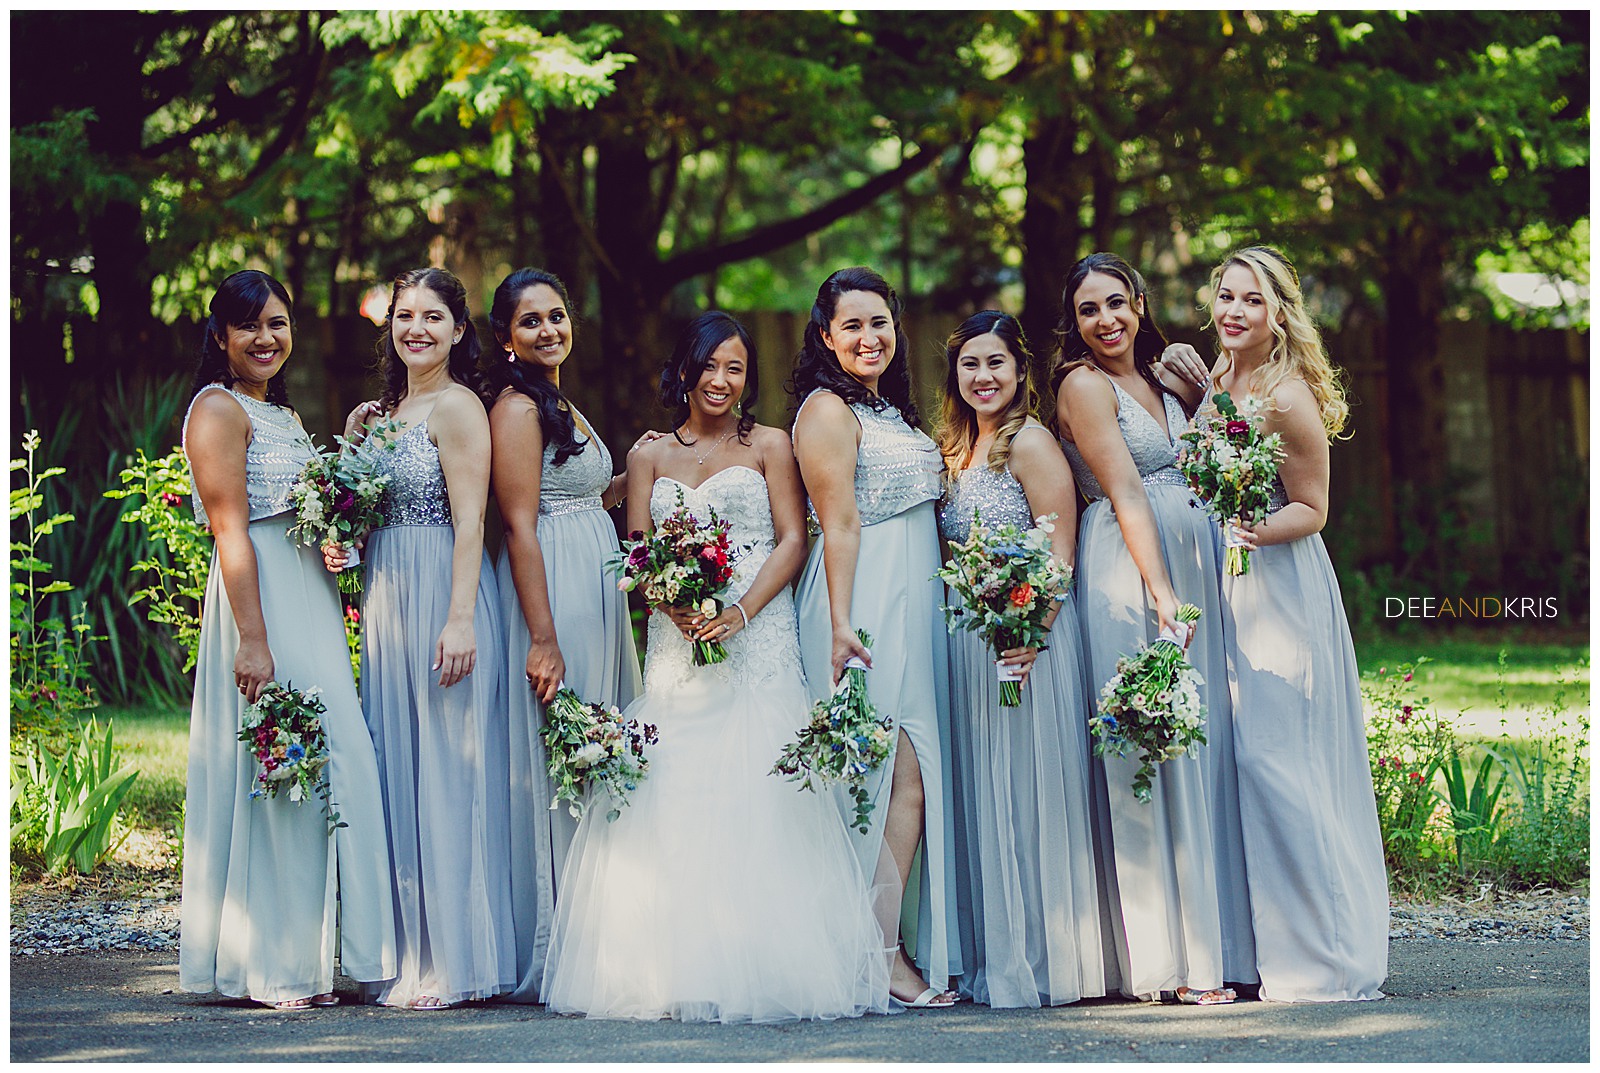 Mountain Shadows Resort wedding pictures, outdoor wedding venue in Forest Hill, CA by Dee and Kris photography. Blue bridesmaid dresses